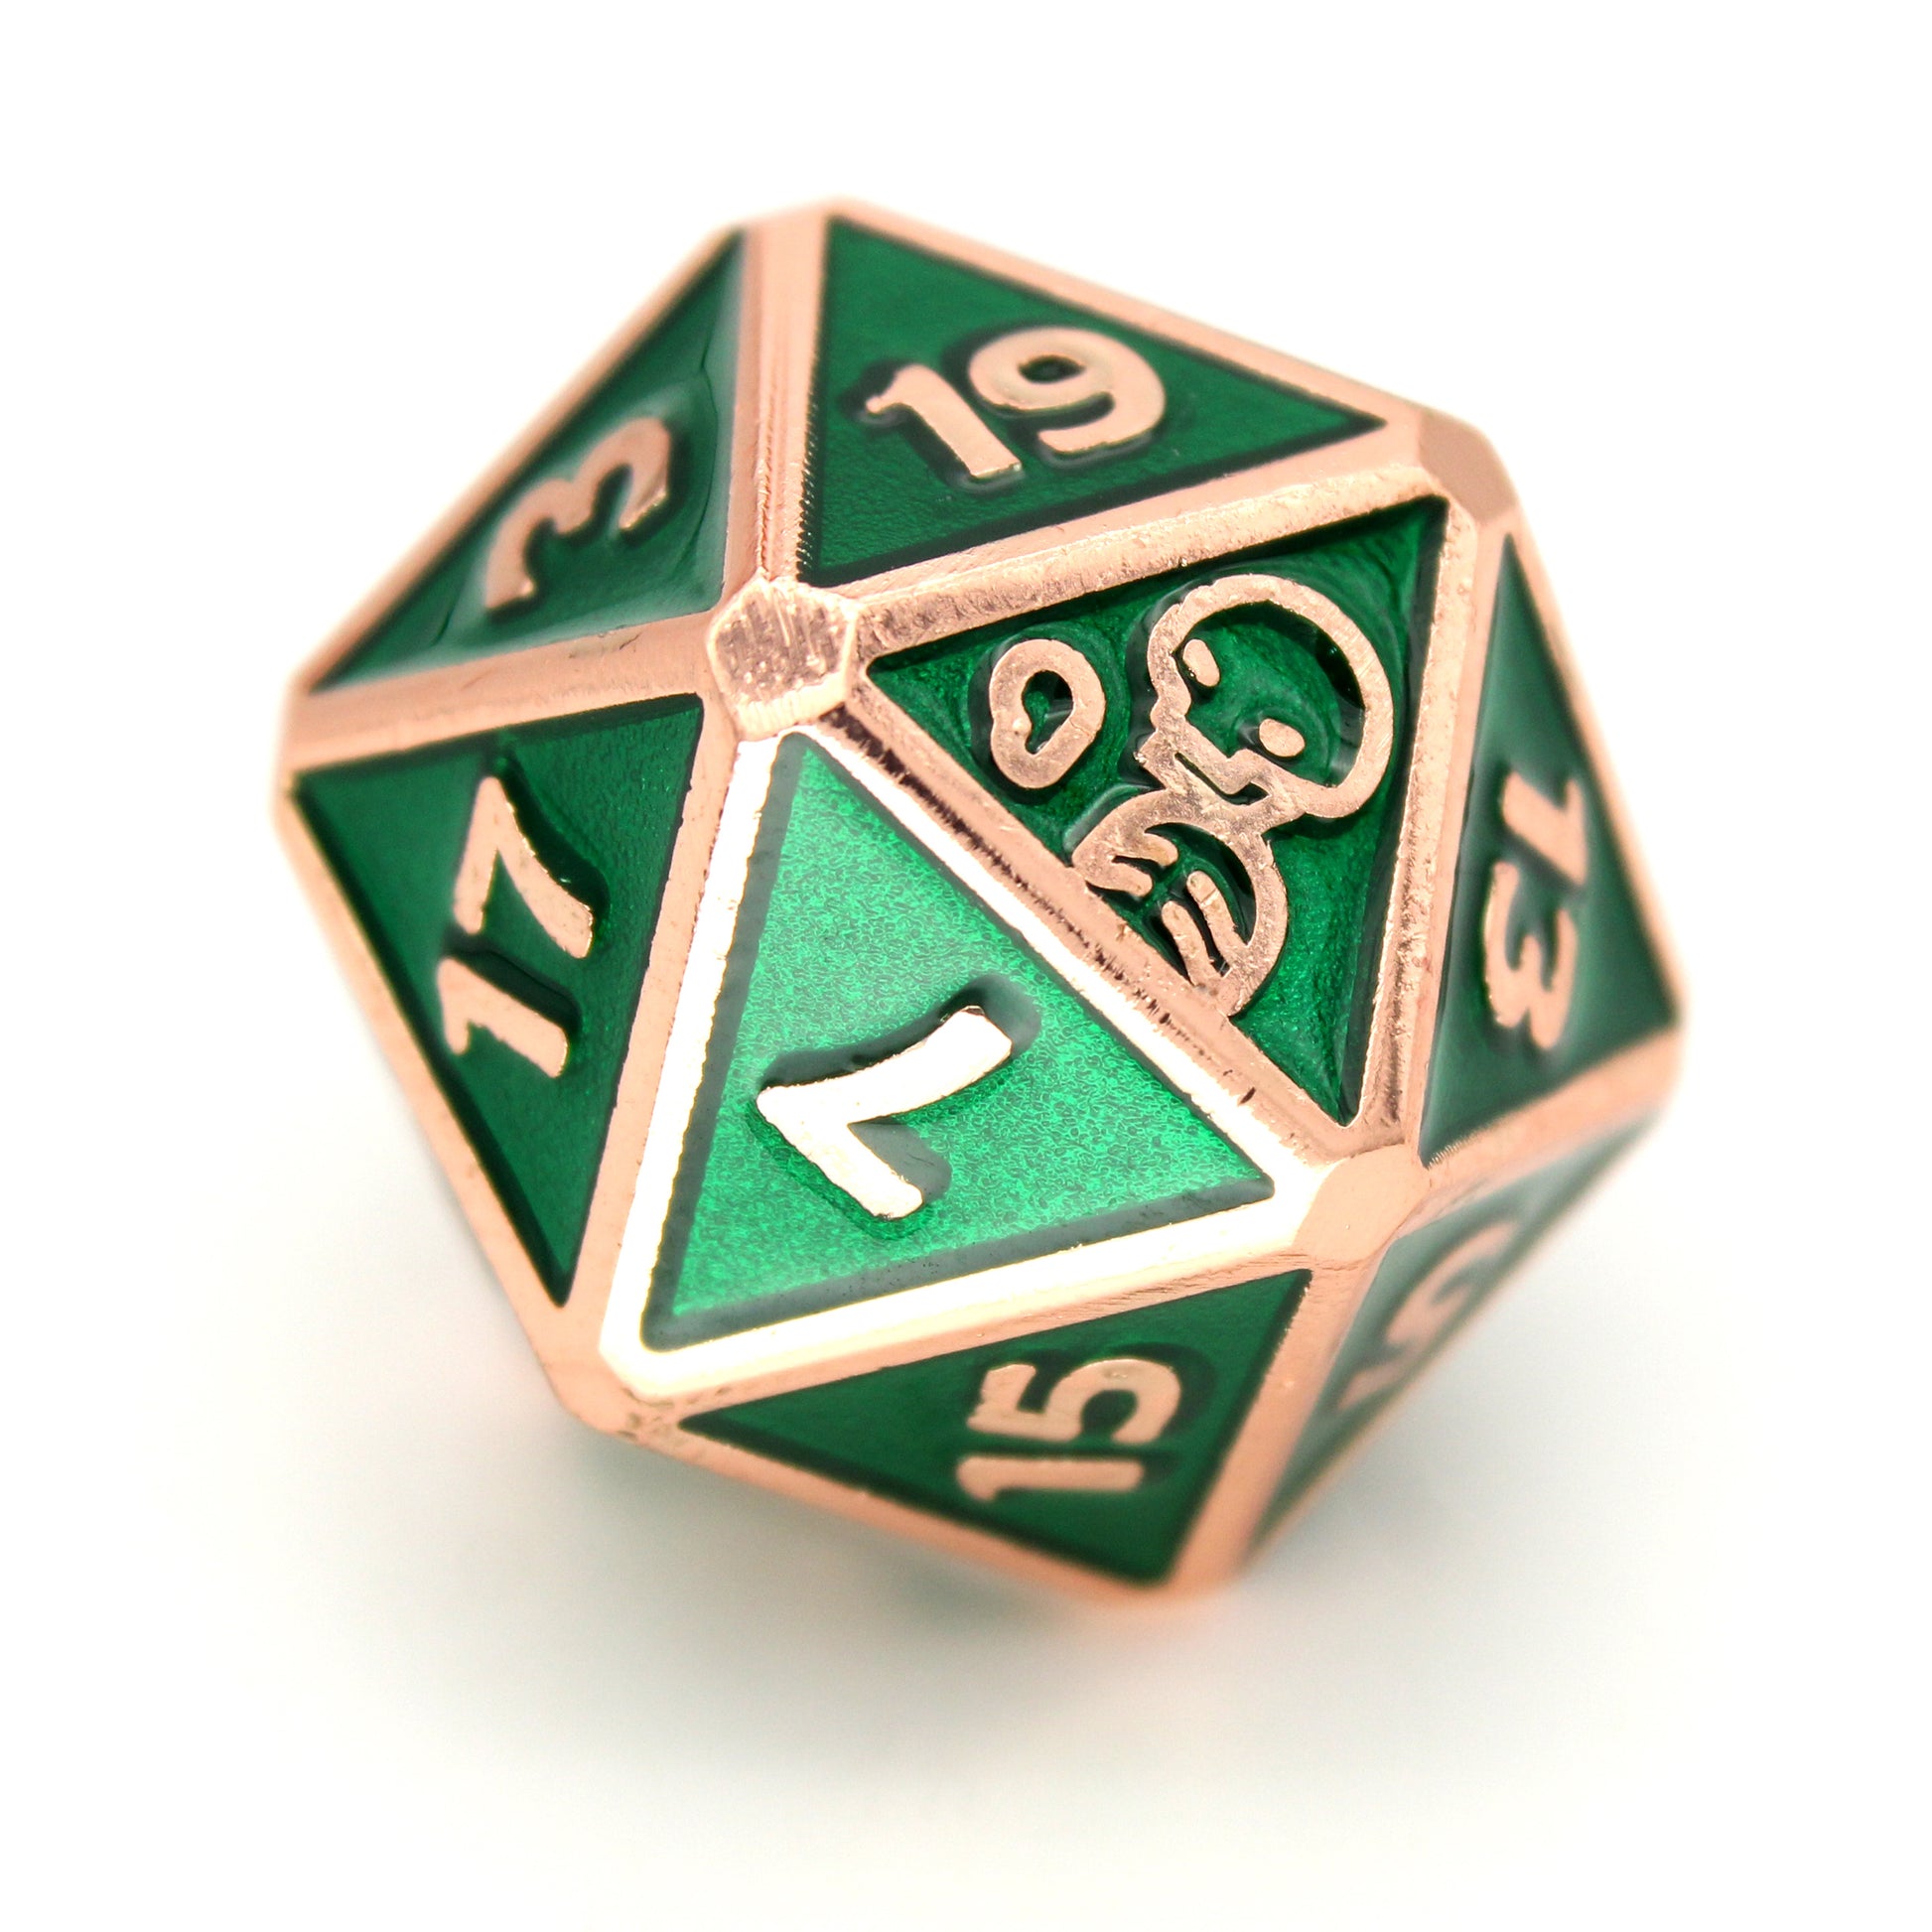 Grinderbin is a 7-piece rose gold, framed metal set filled with a vivid, emerald enamel. It is part of the Adventure Is Nigh collection.